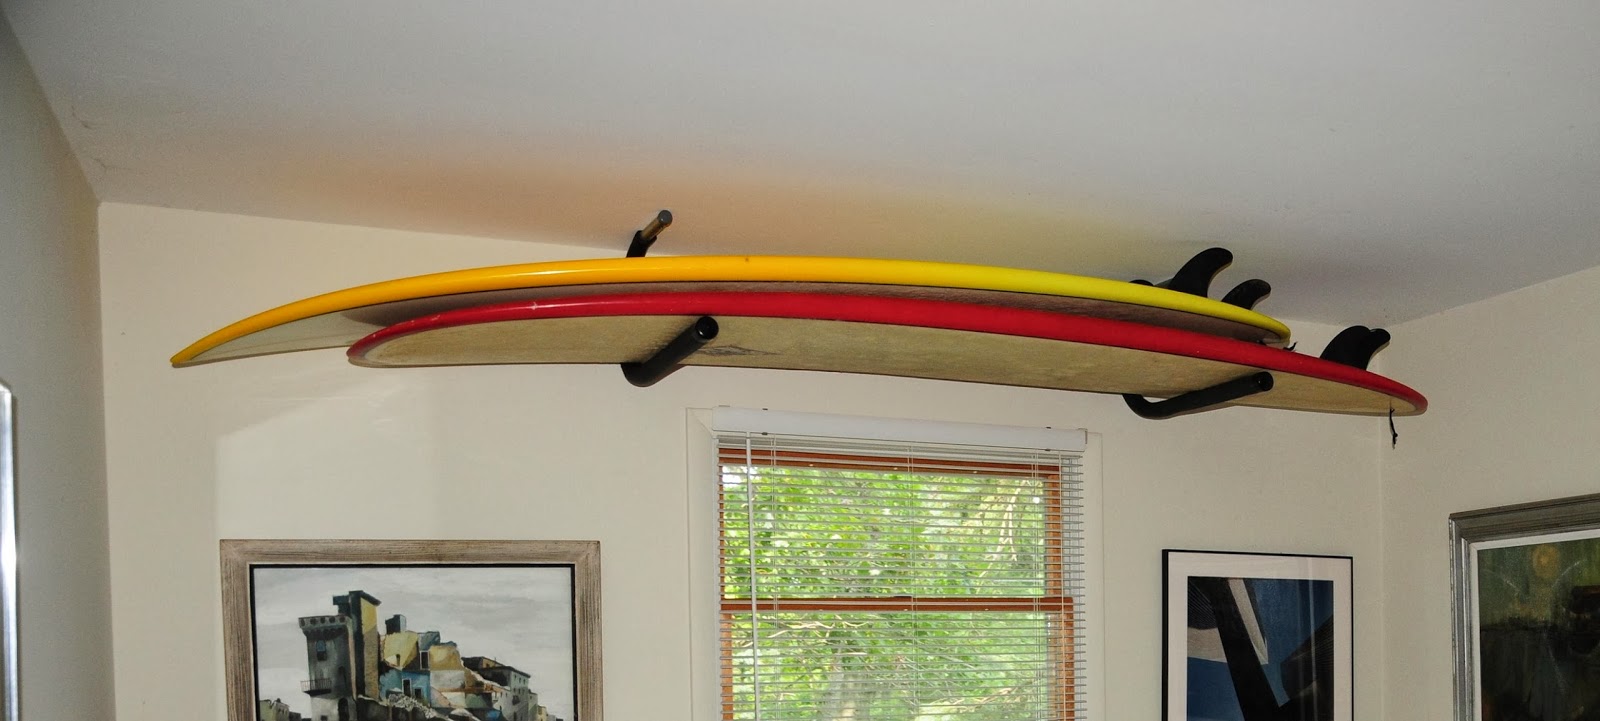 Offshore Winds: Surfboard Storage in a Studio Apartment 